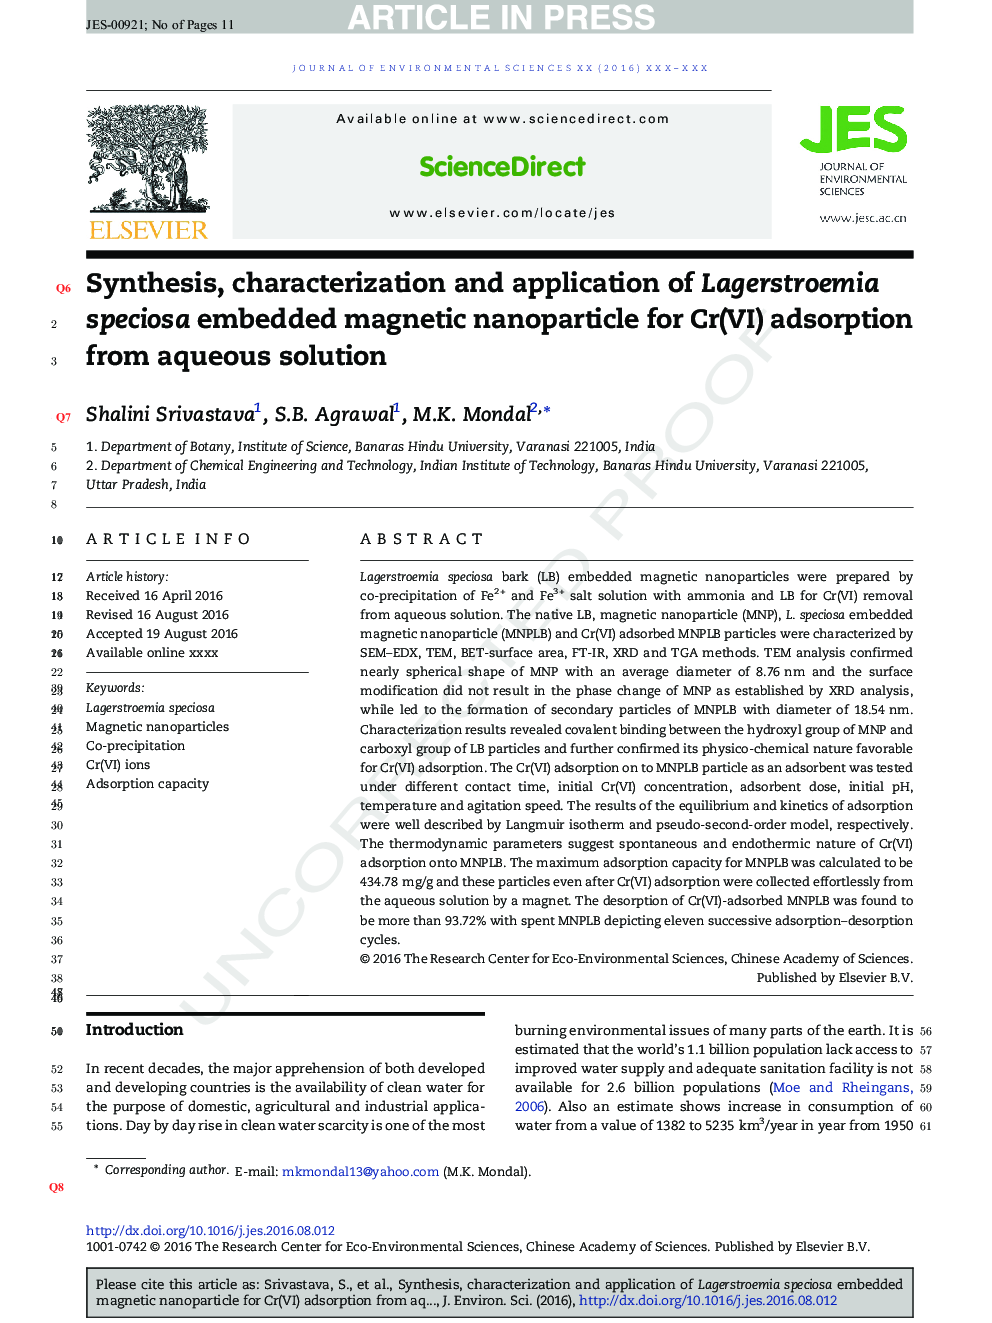 Synthesis, characterization and application of Lagerstroemia speciosa embedded magnetic nanoparticle for Cr(VI) adsorption from aqueous solution